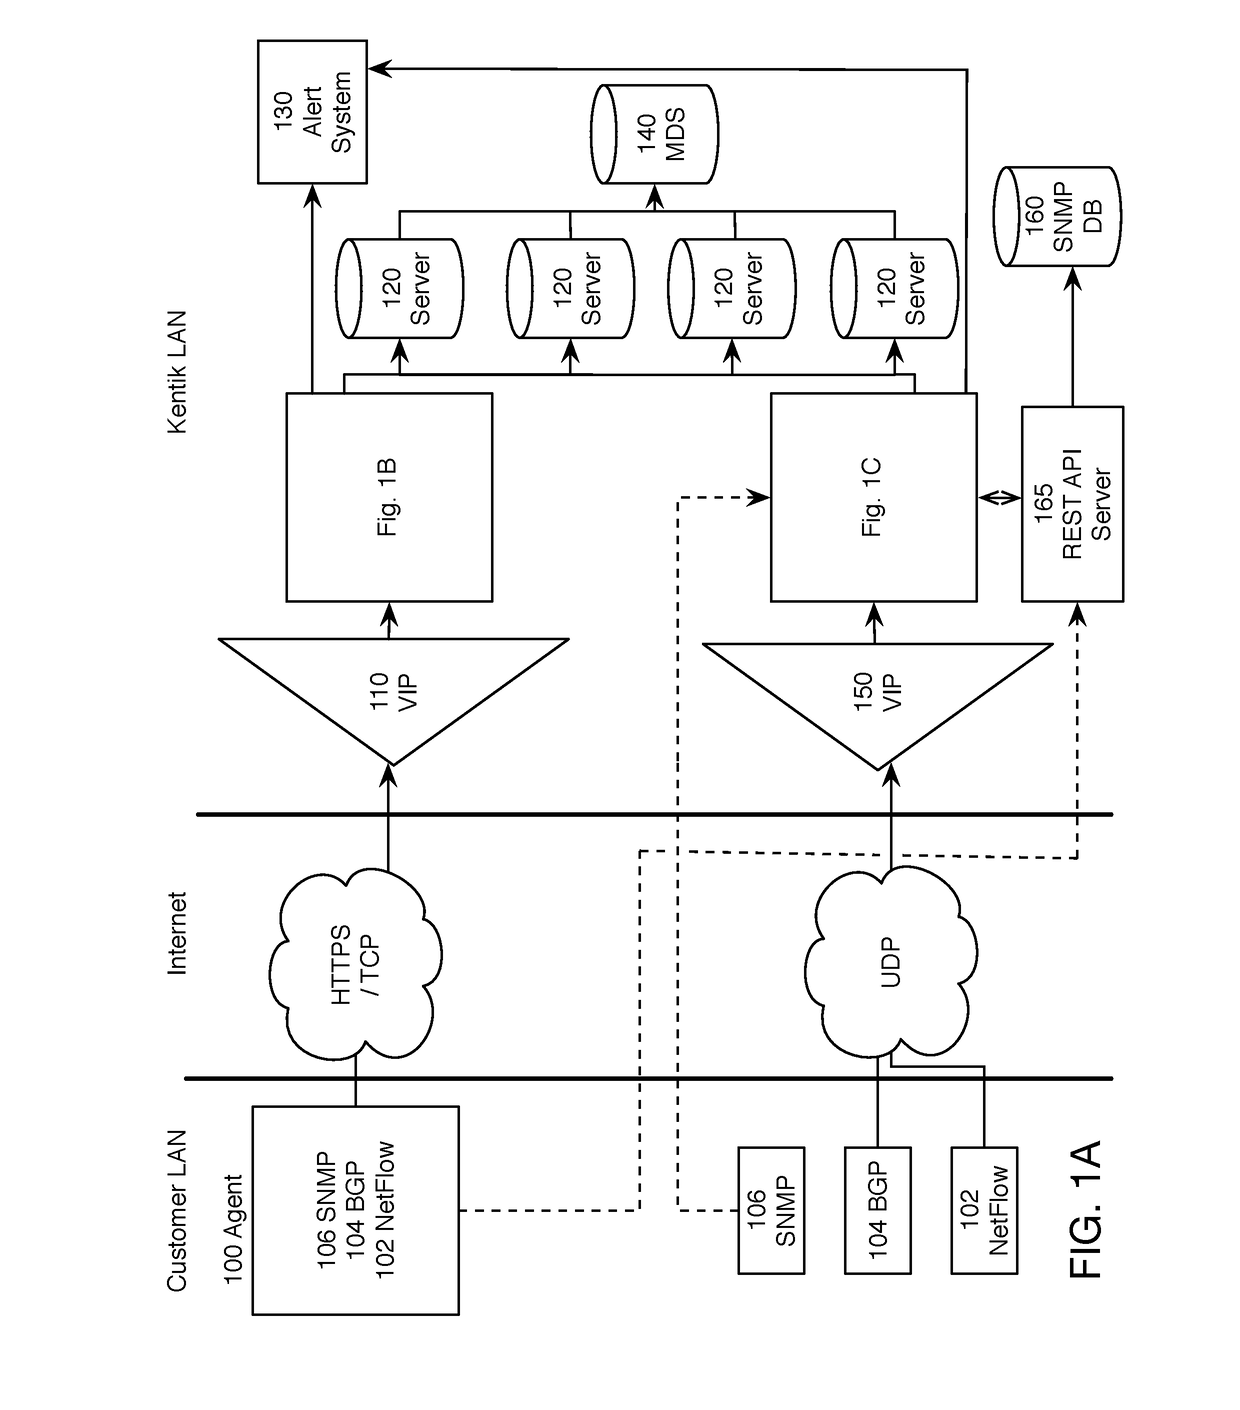 Network Monitoring, Detection, and Analysis System